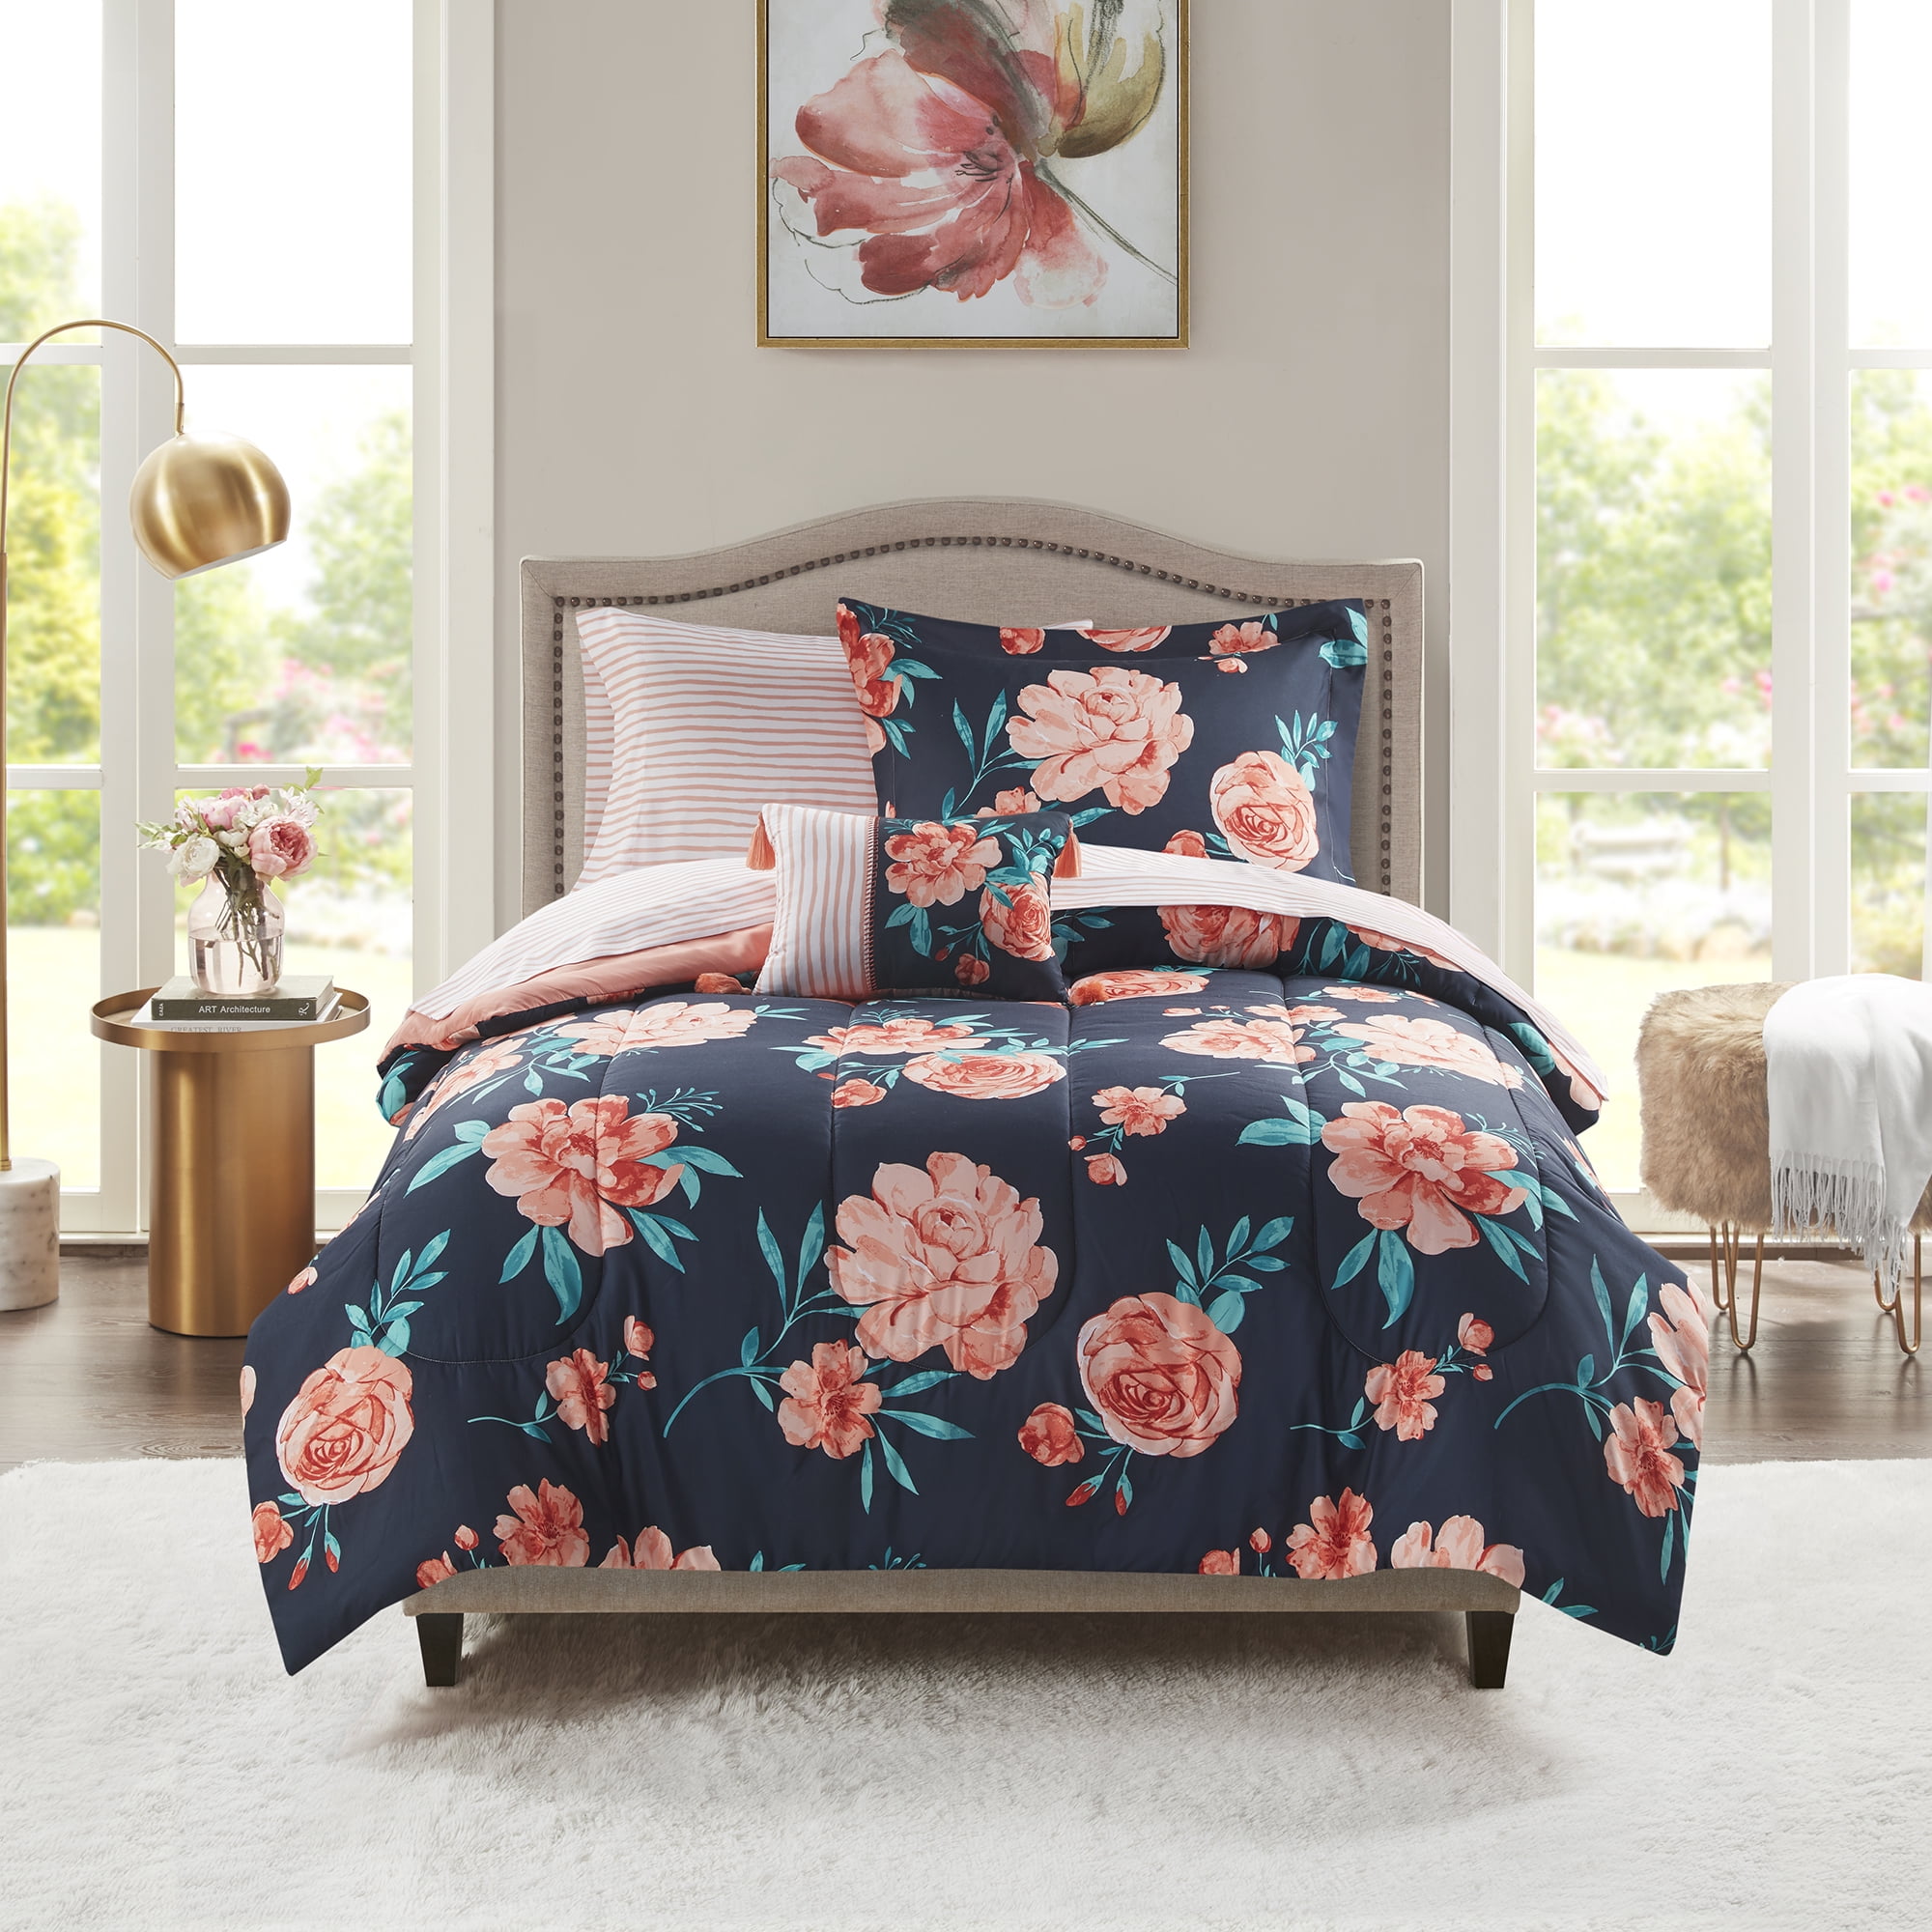 Mainstays Peach Floral 6 Piece Bed in a Bag Comforter Set with Sheets, Twin/Twin XL